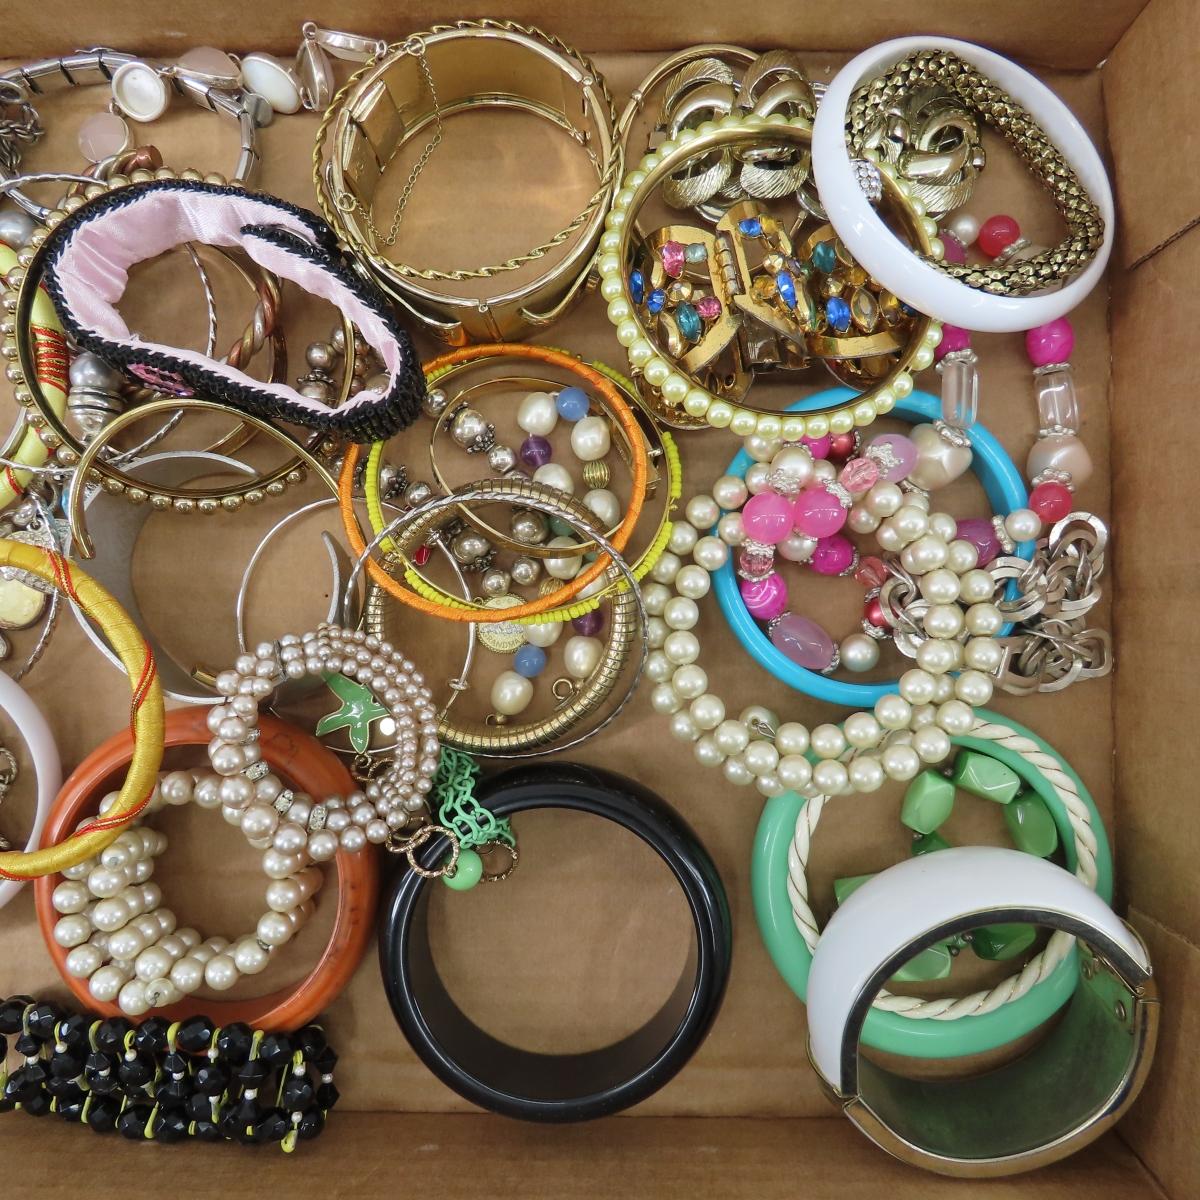 Fashion Jewelry Necklaces, Bracelets, and more